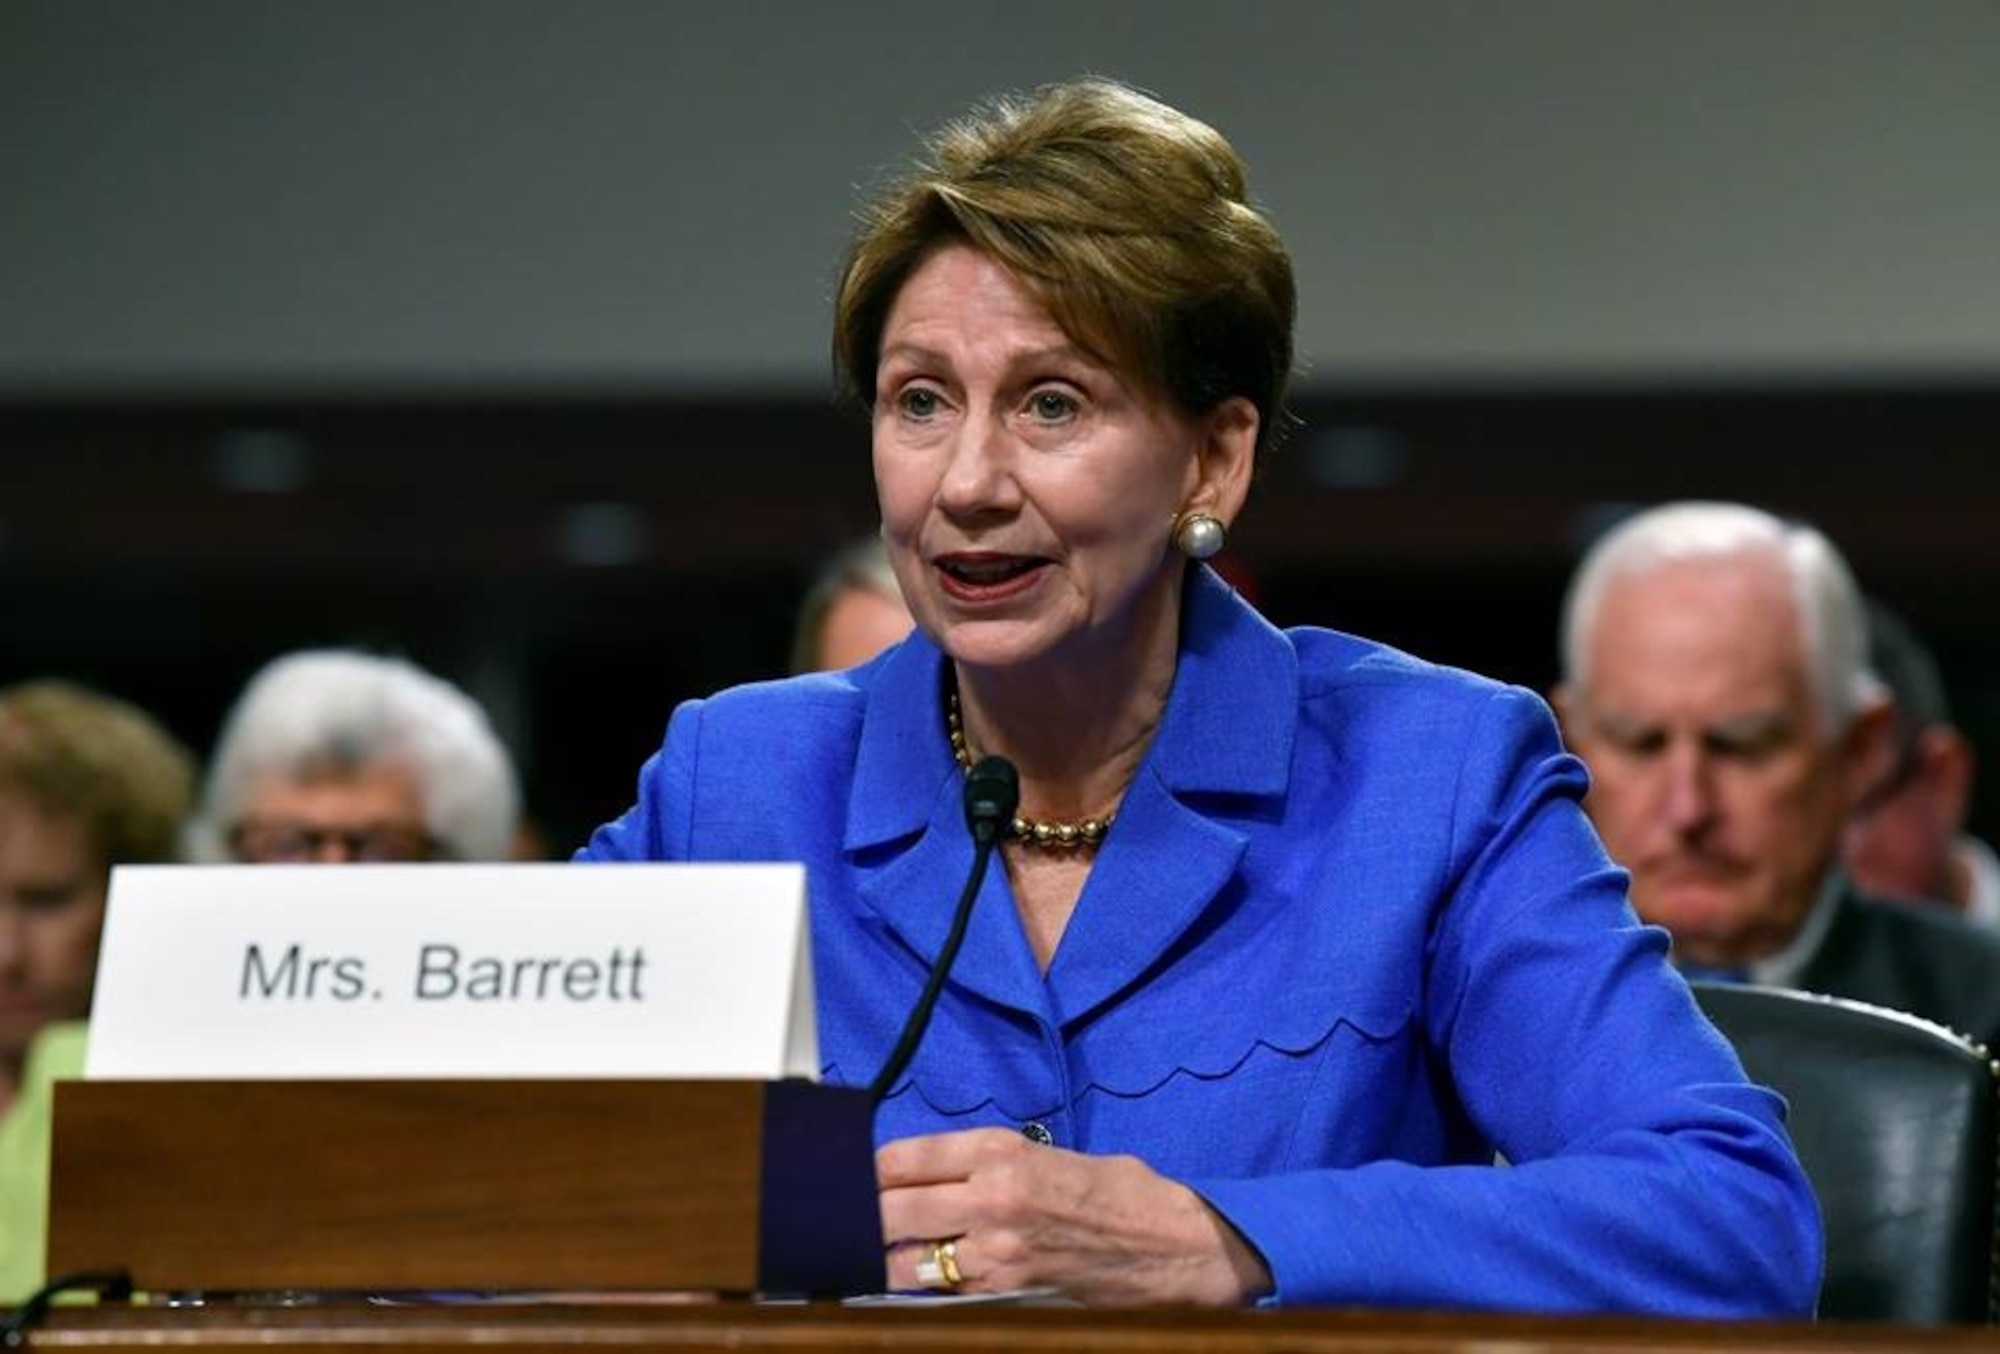 Barbara Barrett, Secretary of the Air Force nominee, testifies before the Senate Armed Services Committee, as a part of the confirmation process, Sept. 12, 2019, in Washington, D.C. (U.S. Air Force photo by Wayne Clark)